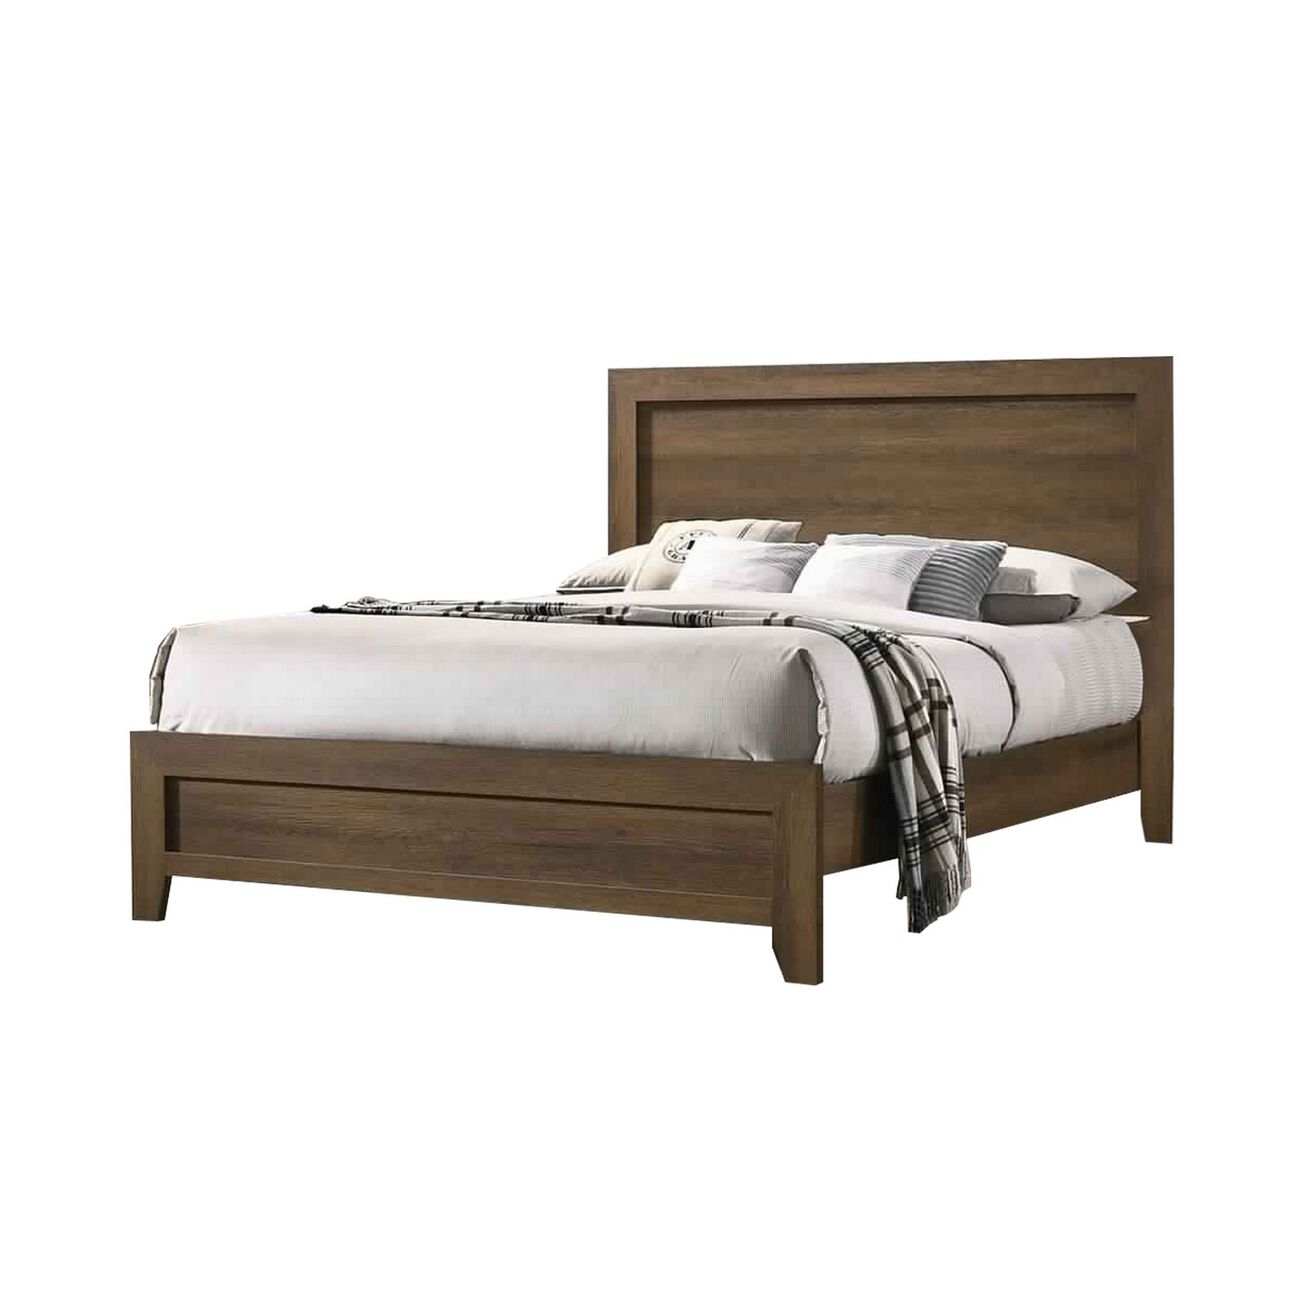 Transitional Style Wooden Eastern King Bed with Raised Molding Trim, Brown